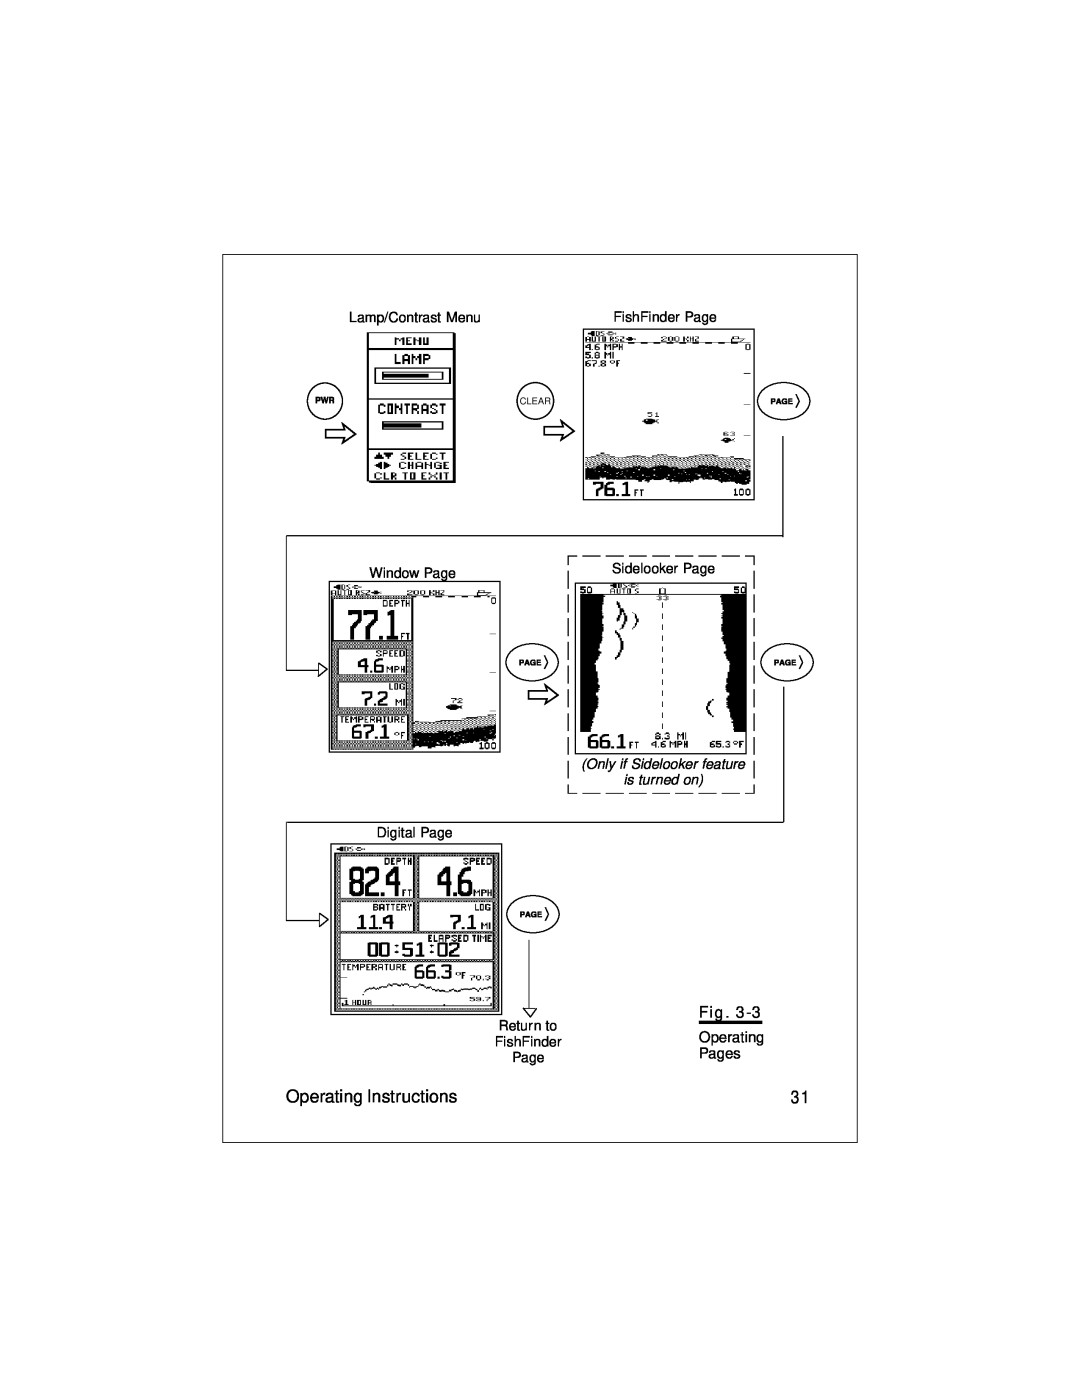 Raymarine L470 instruction manual Operating Instructions, Only if Sidelooker feature, is turned on 